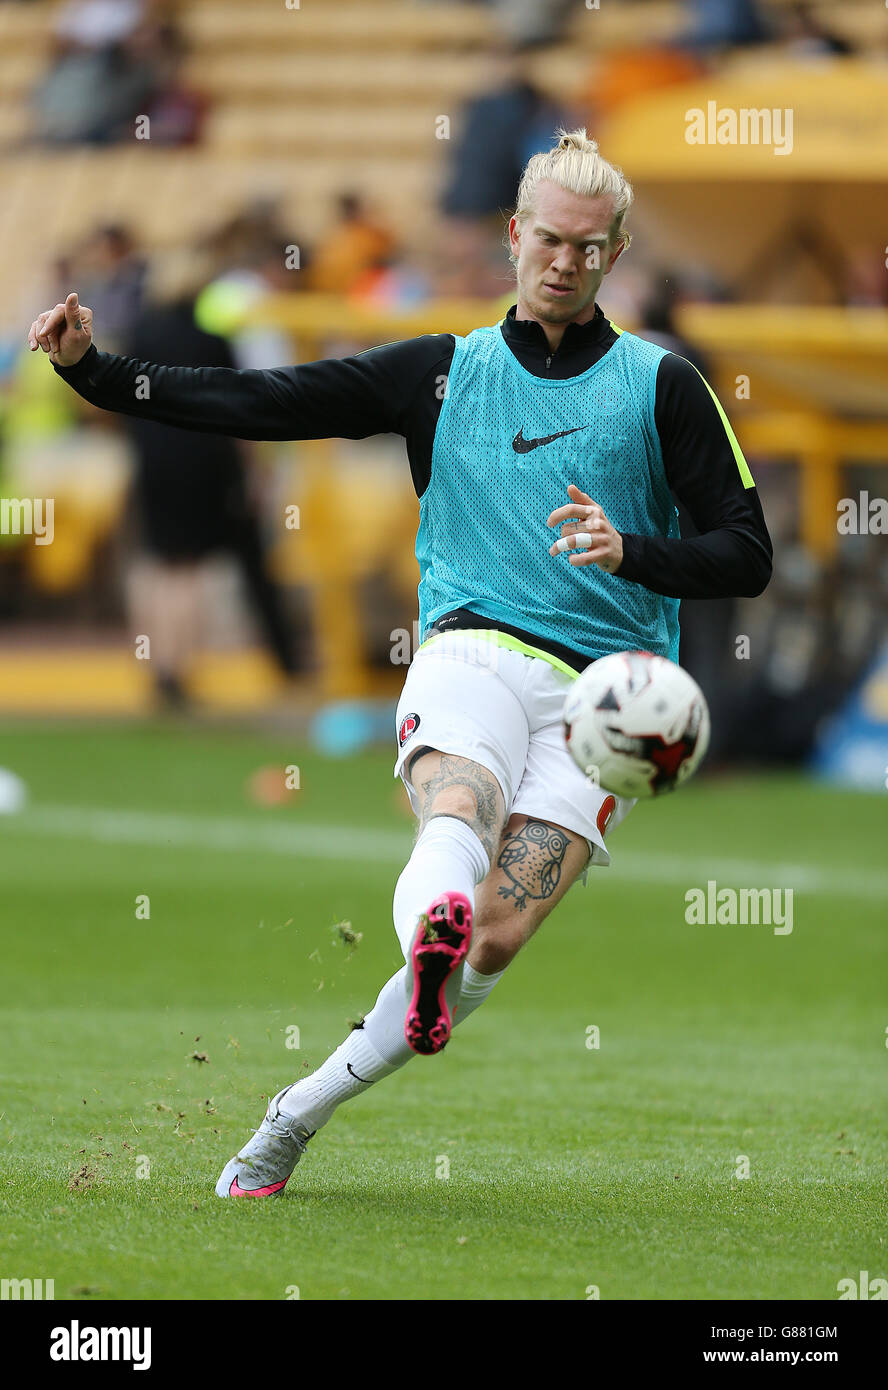 Charlton Athletic's Simon Makienok Christoffersen warms up before the Sky Bet Championship match at Molineux, Wolverhampton. PRESS ASSOCIATION Photo. Picture date: Saturday August 29, 2015. See PA story SOCCER Wolves. Photo credit should read: Barrington Coombs/PA Wire. Stock Photo